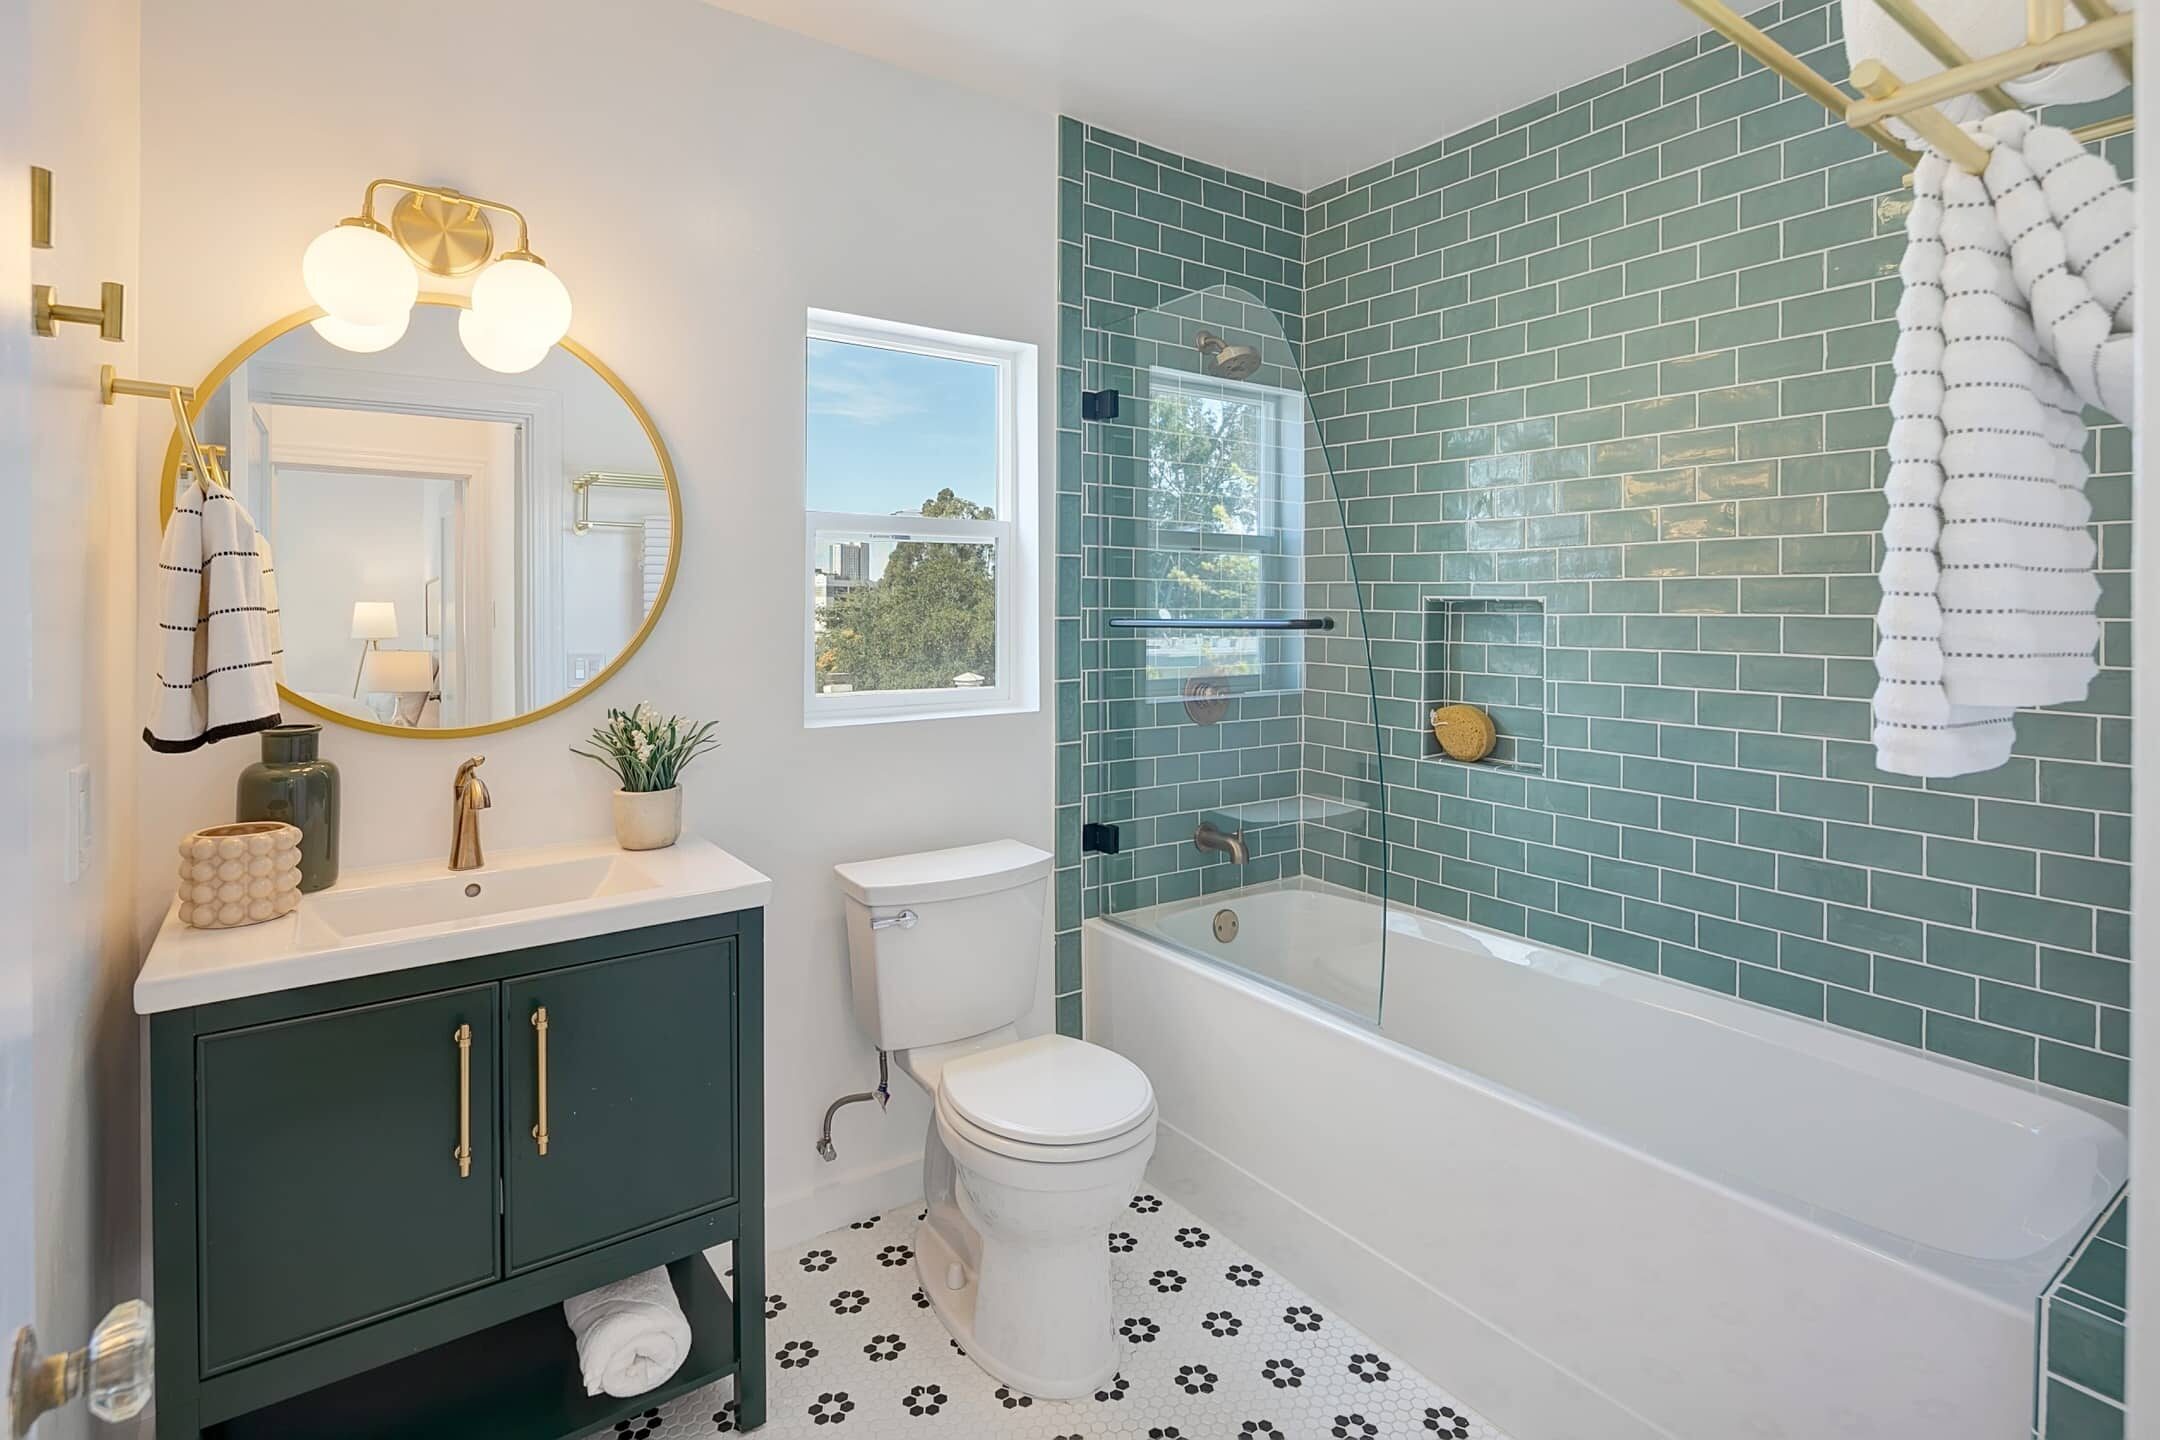 A bathroom with green tile and gold fixtures.